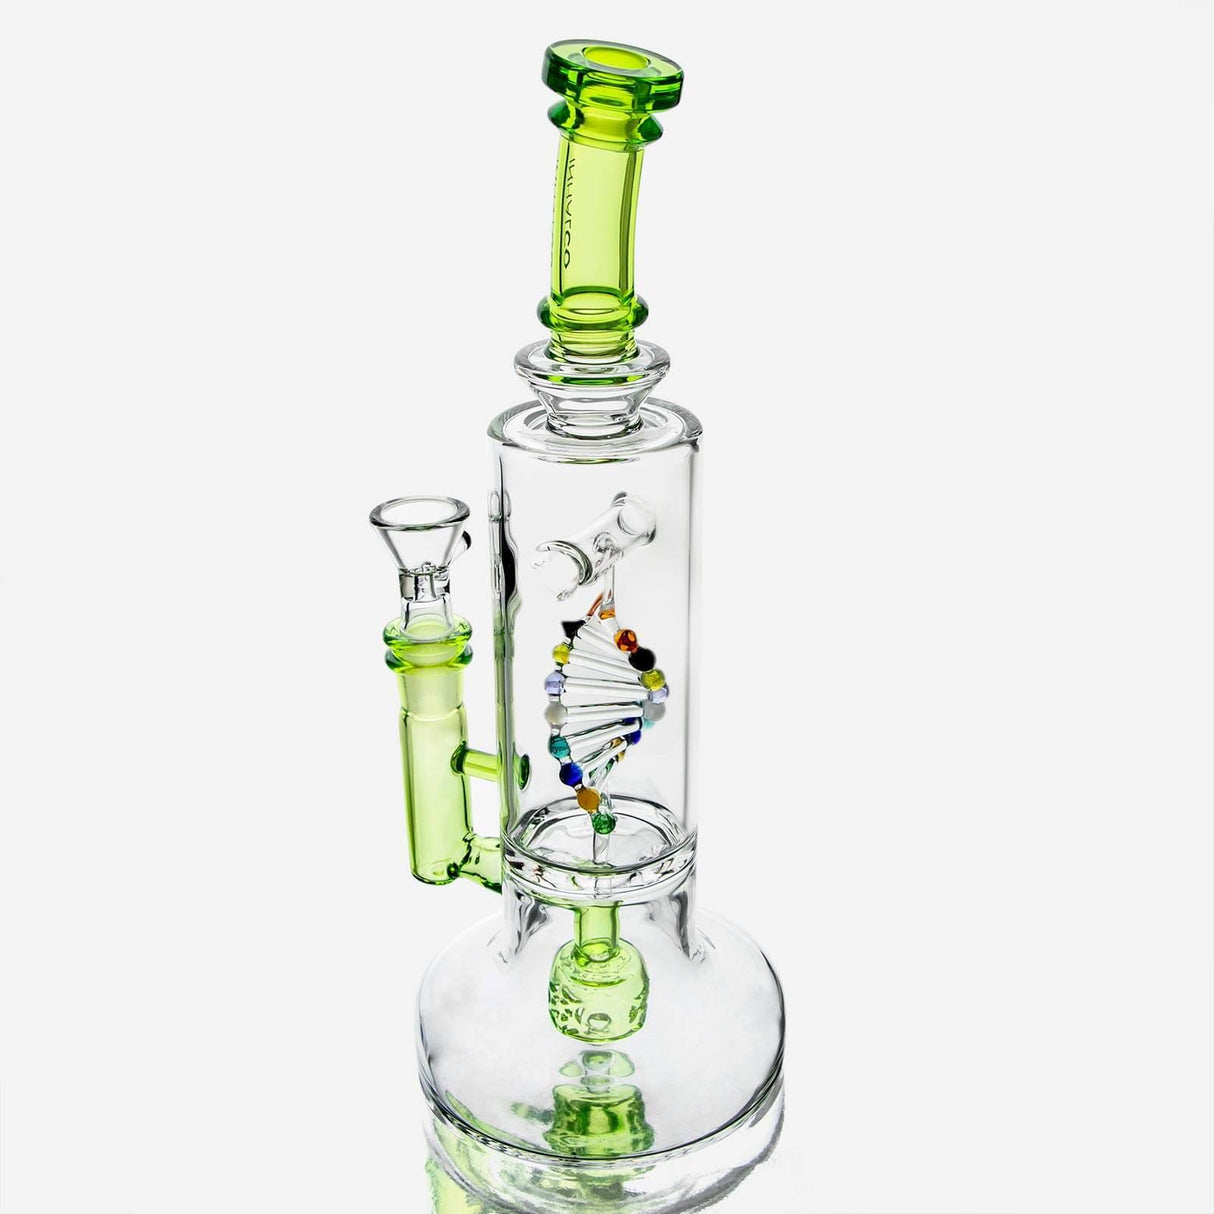 PILOTDIARY DNA Bong with intricate helix design and green accents, front view on white background